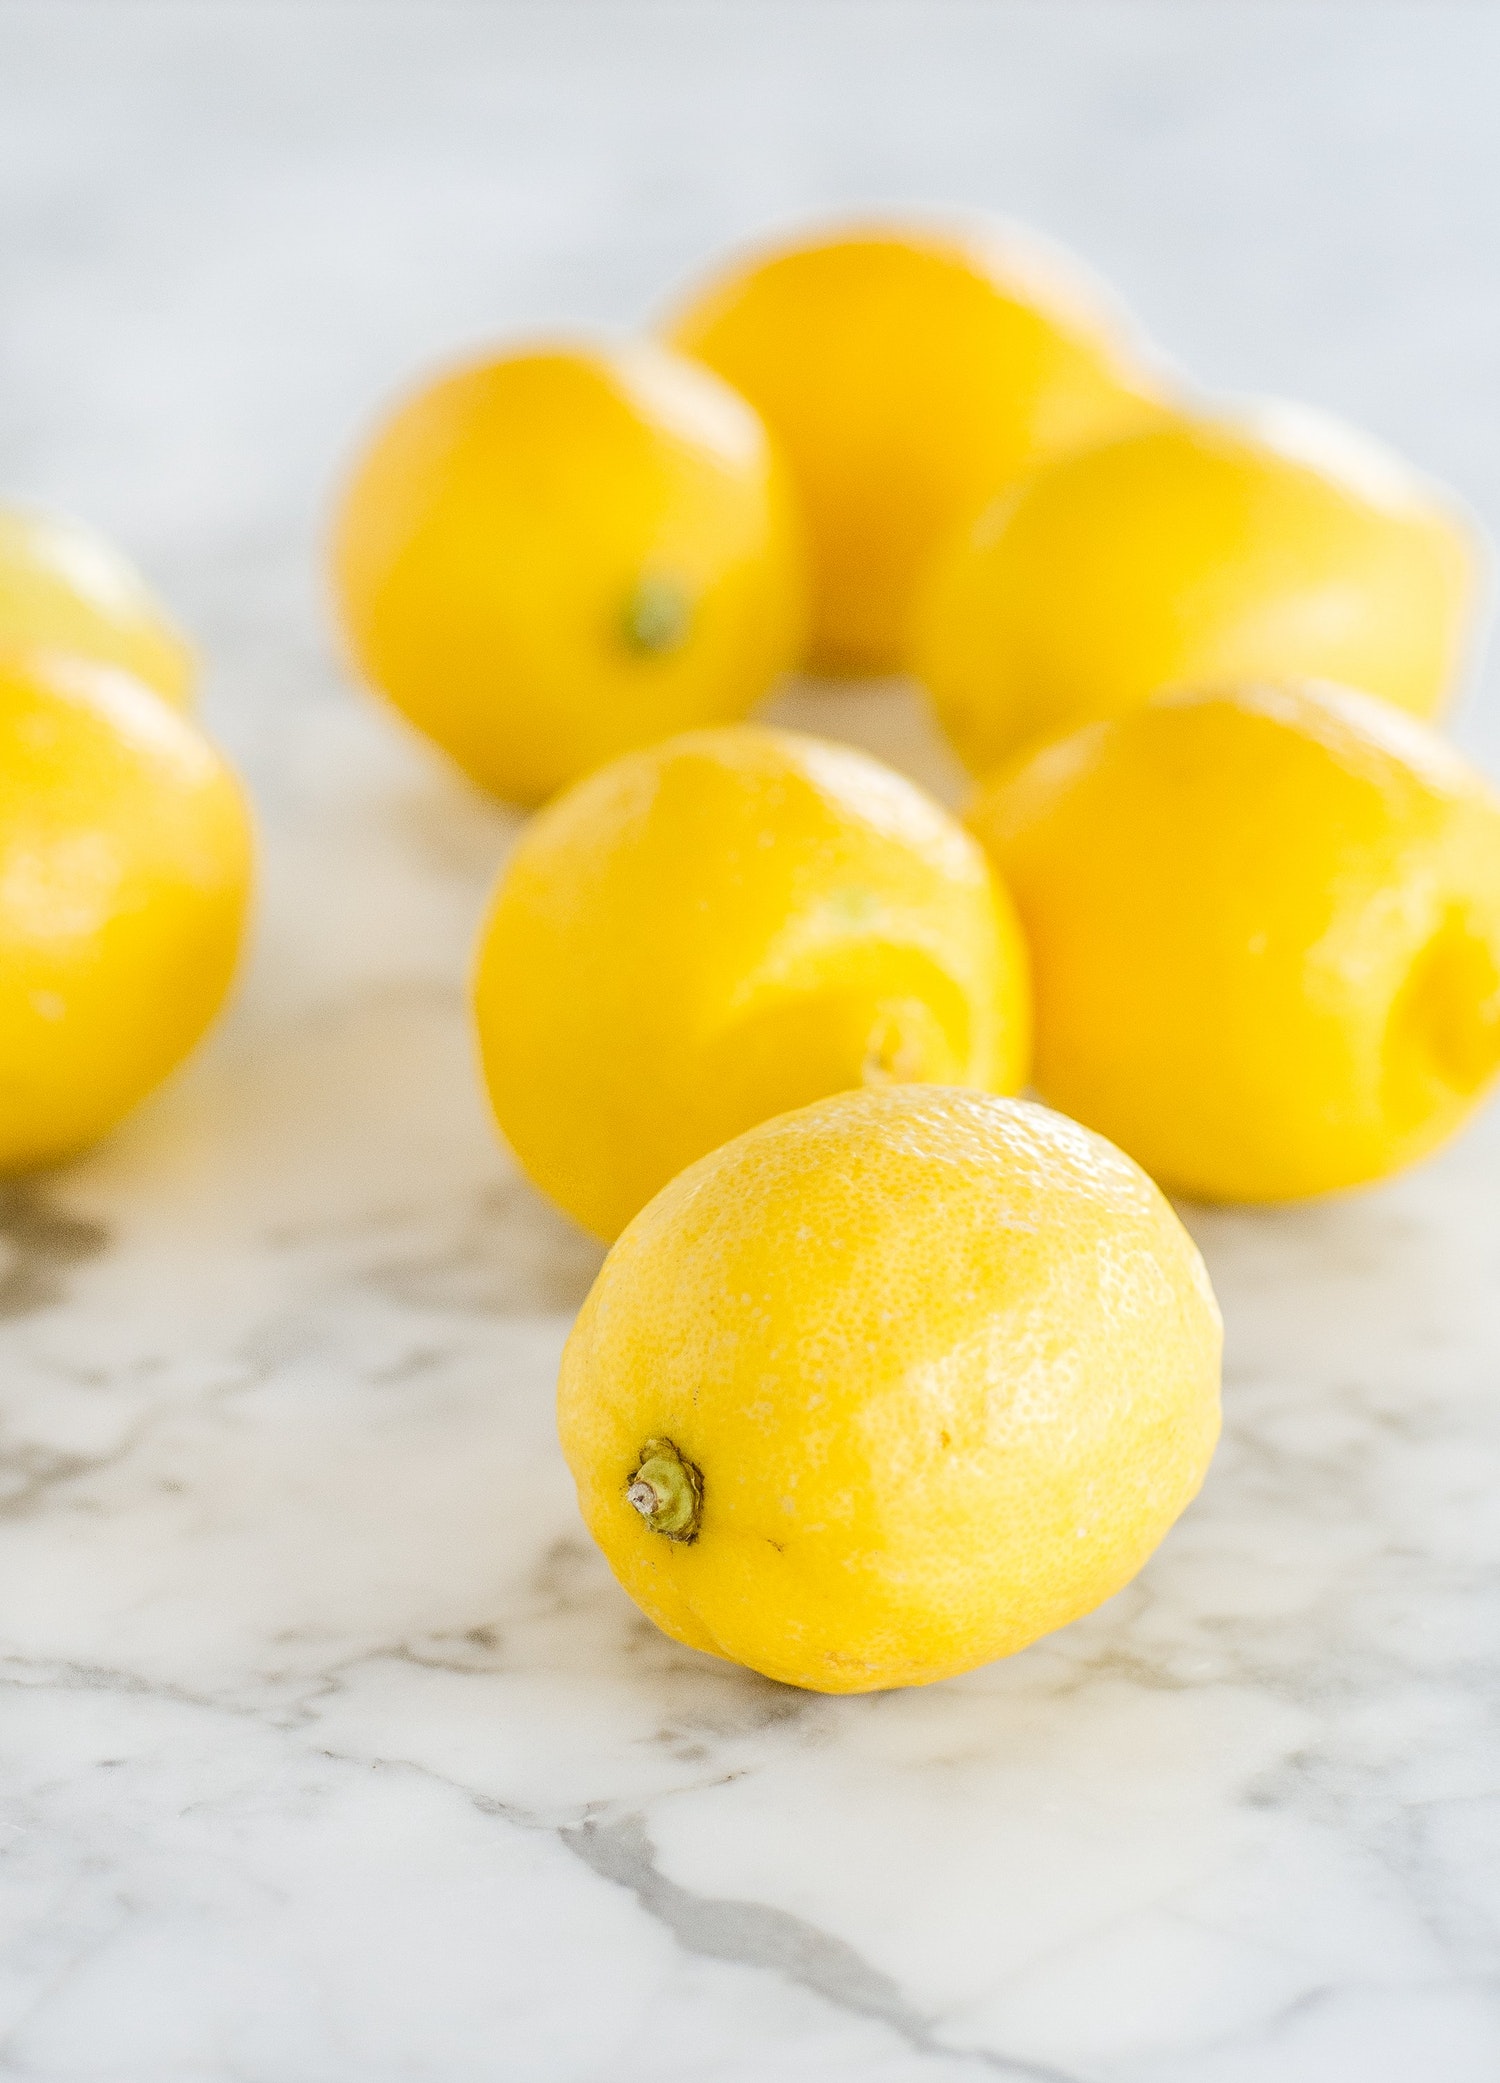 10 Clever Ways to Clean With a Lemon | Kitchn